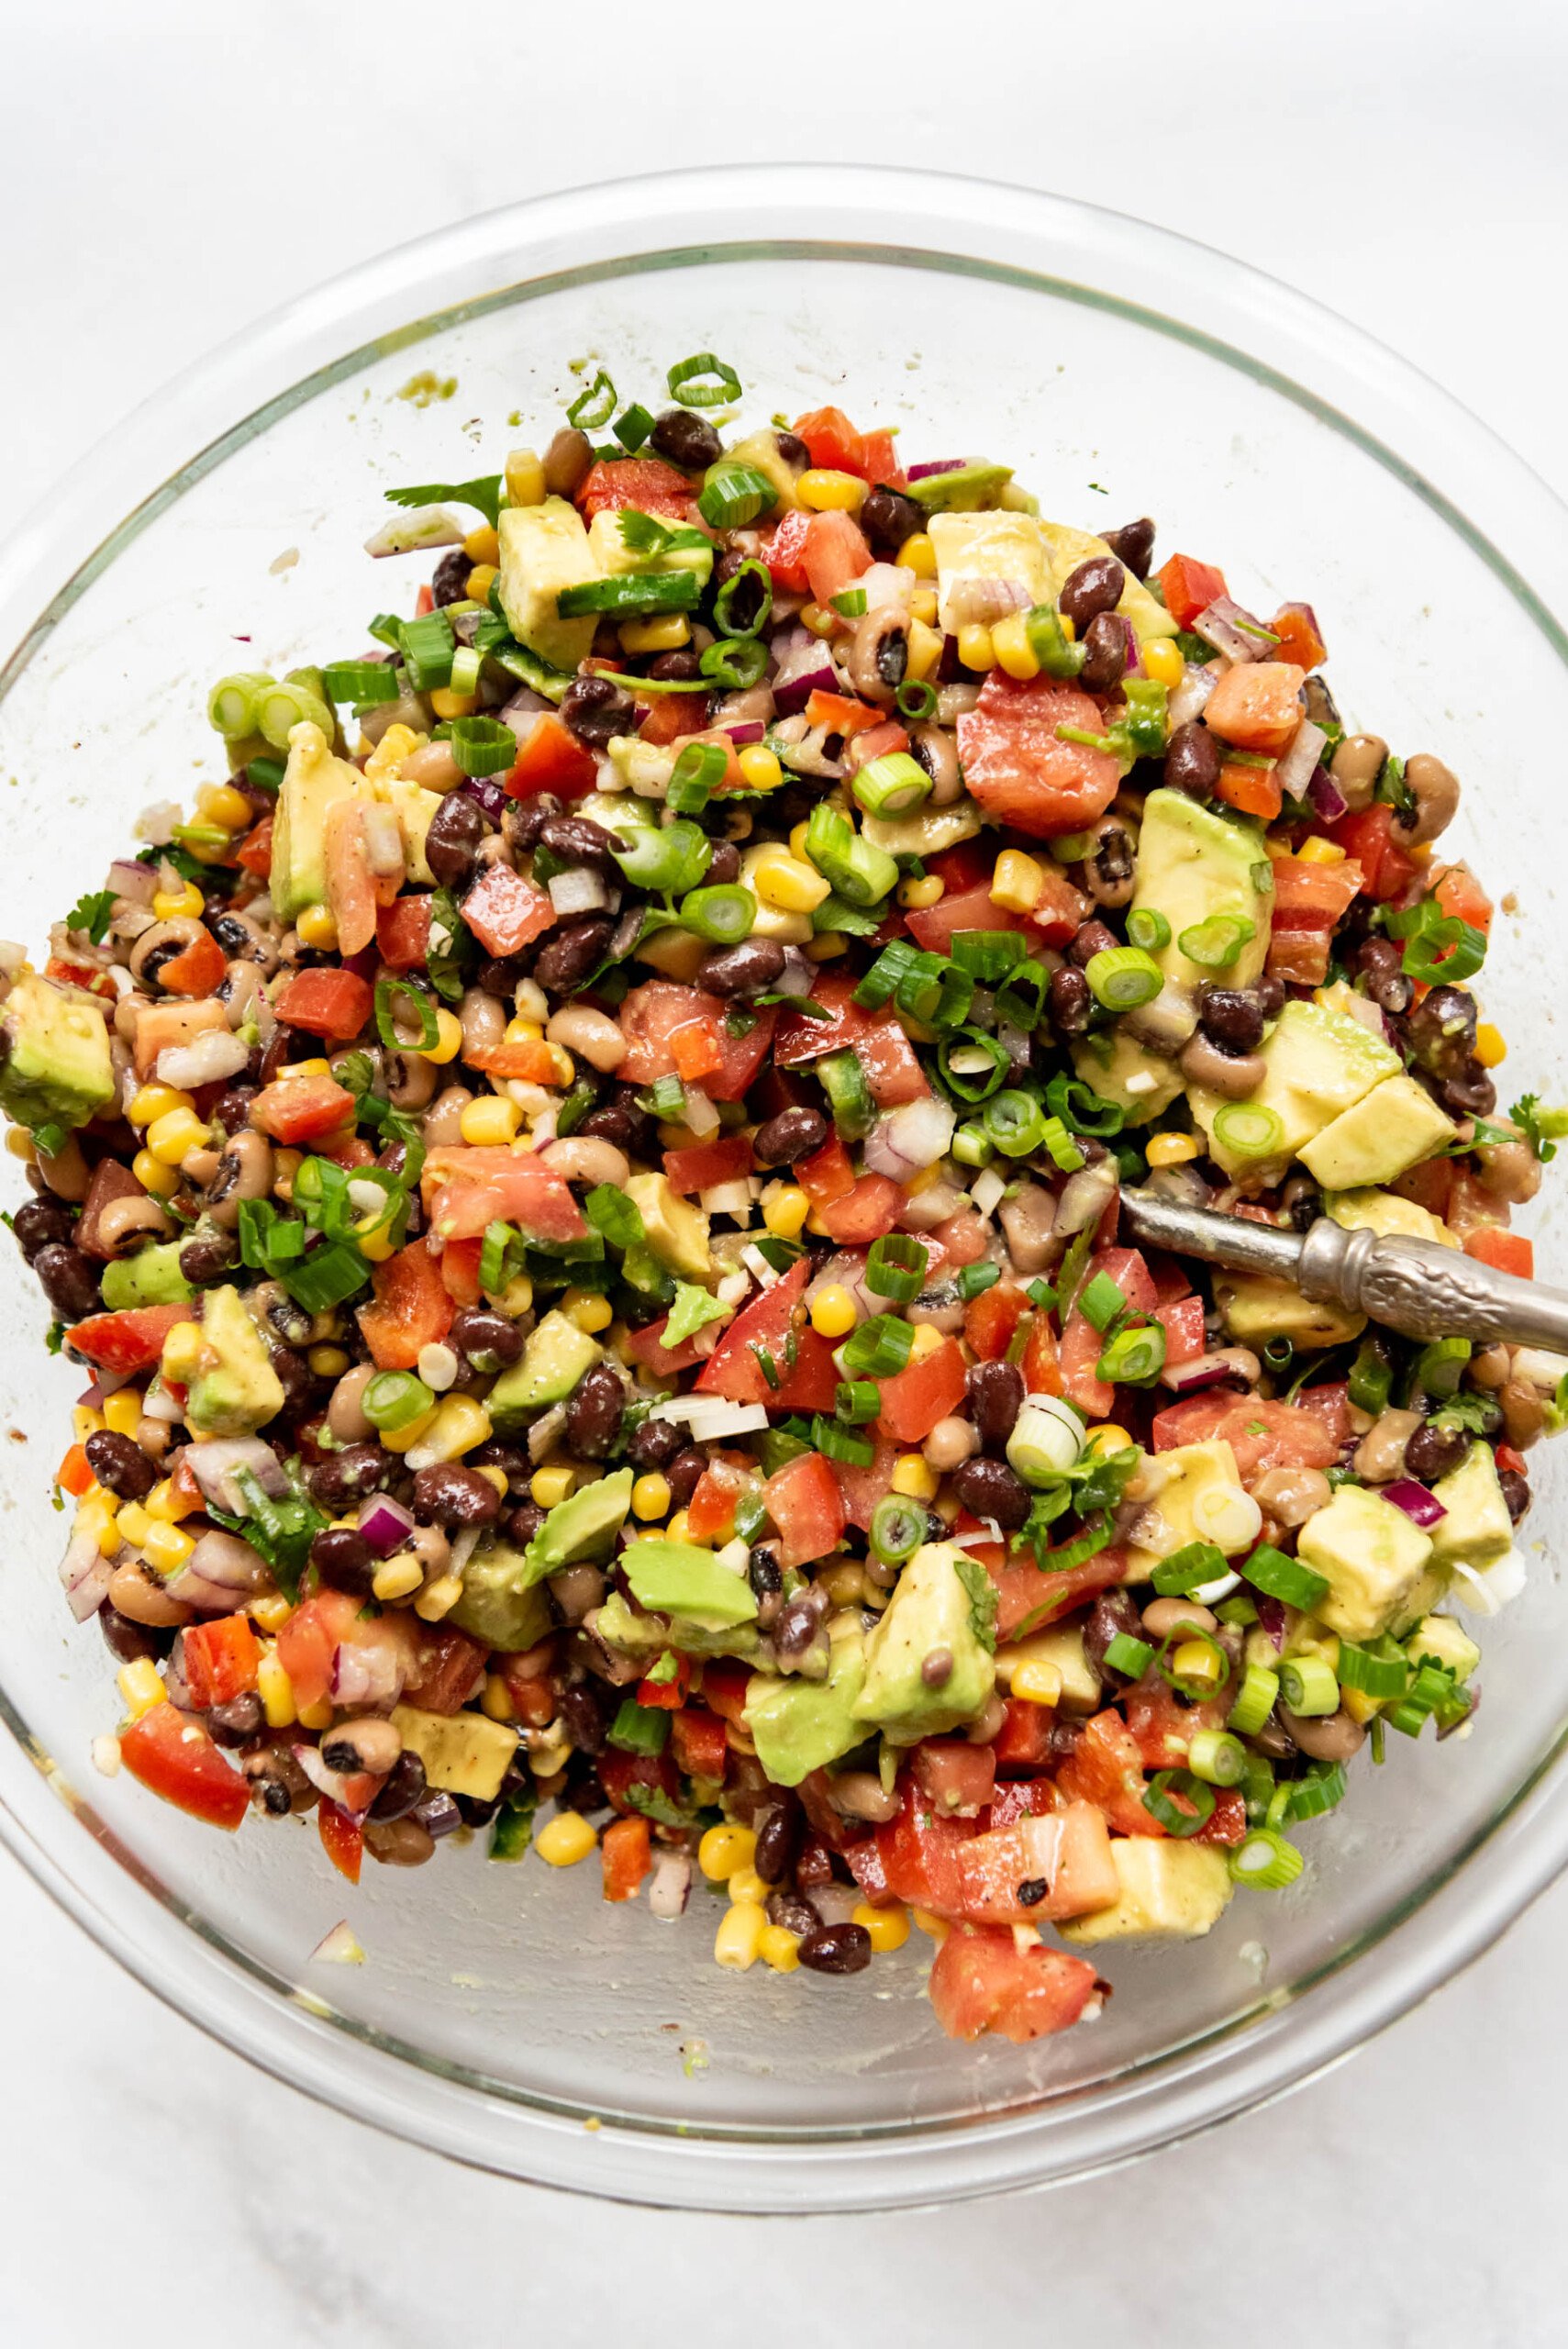 Cowboy caviar in a bowl after everything has been tossed together.